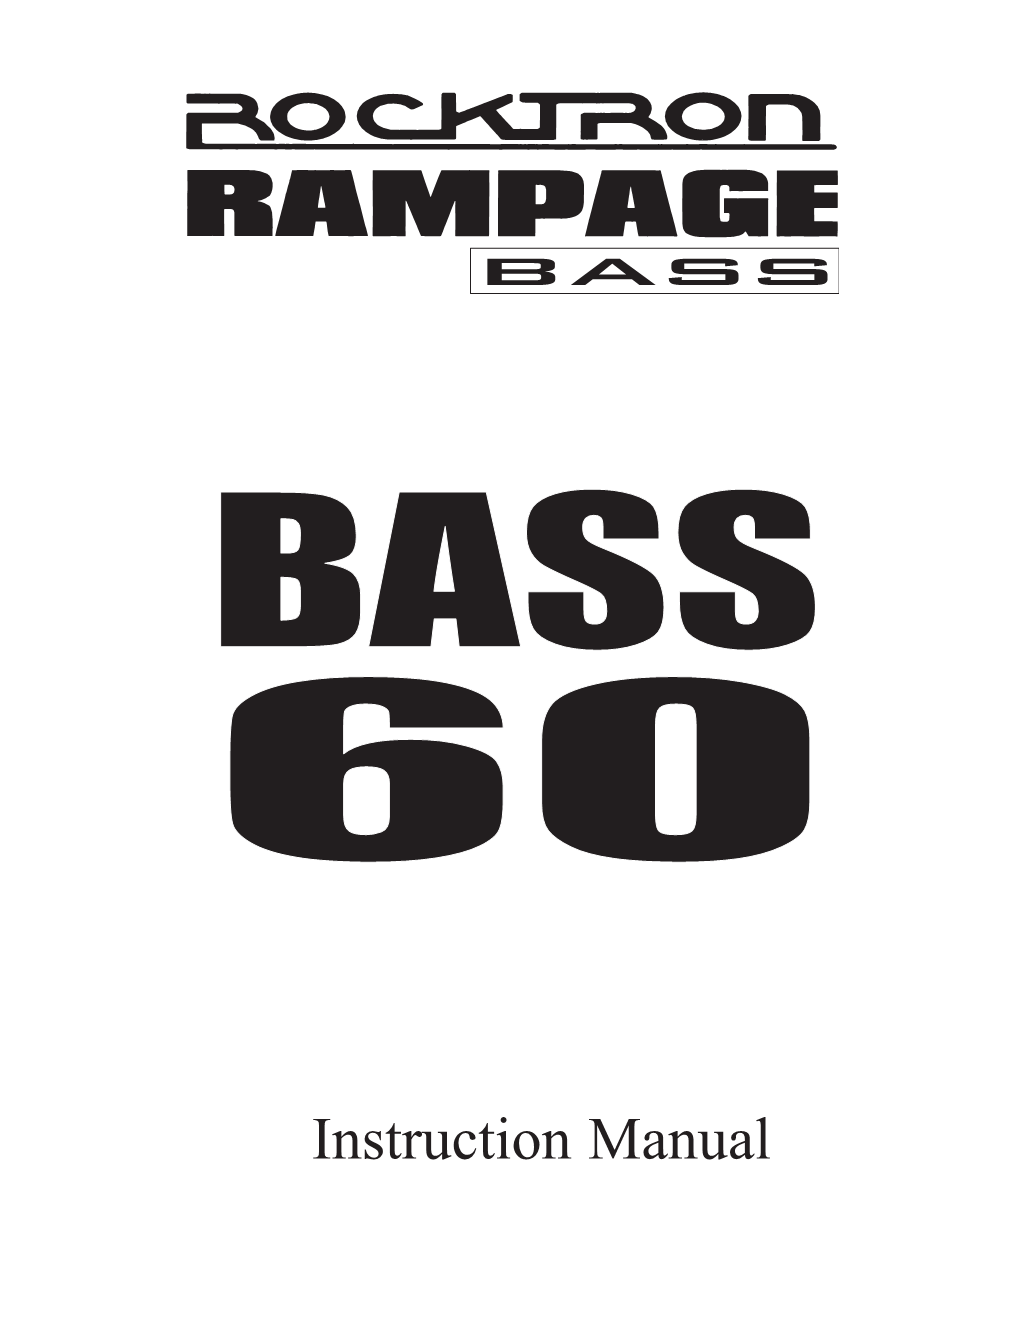 Rocktron Bass60 Bass Amplifier Has Been Tested and Complies with the Following Standards and Directives As Set Forth by the European Union